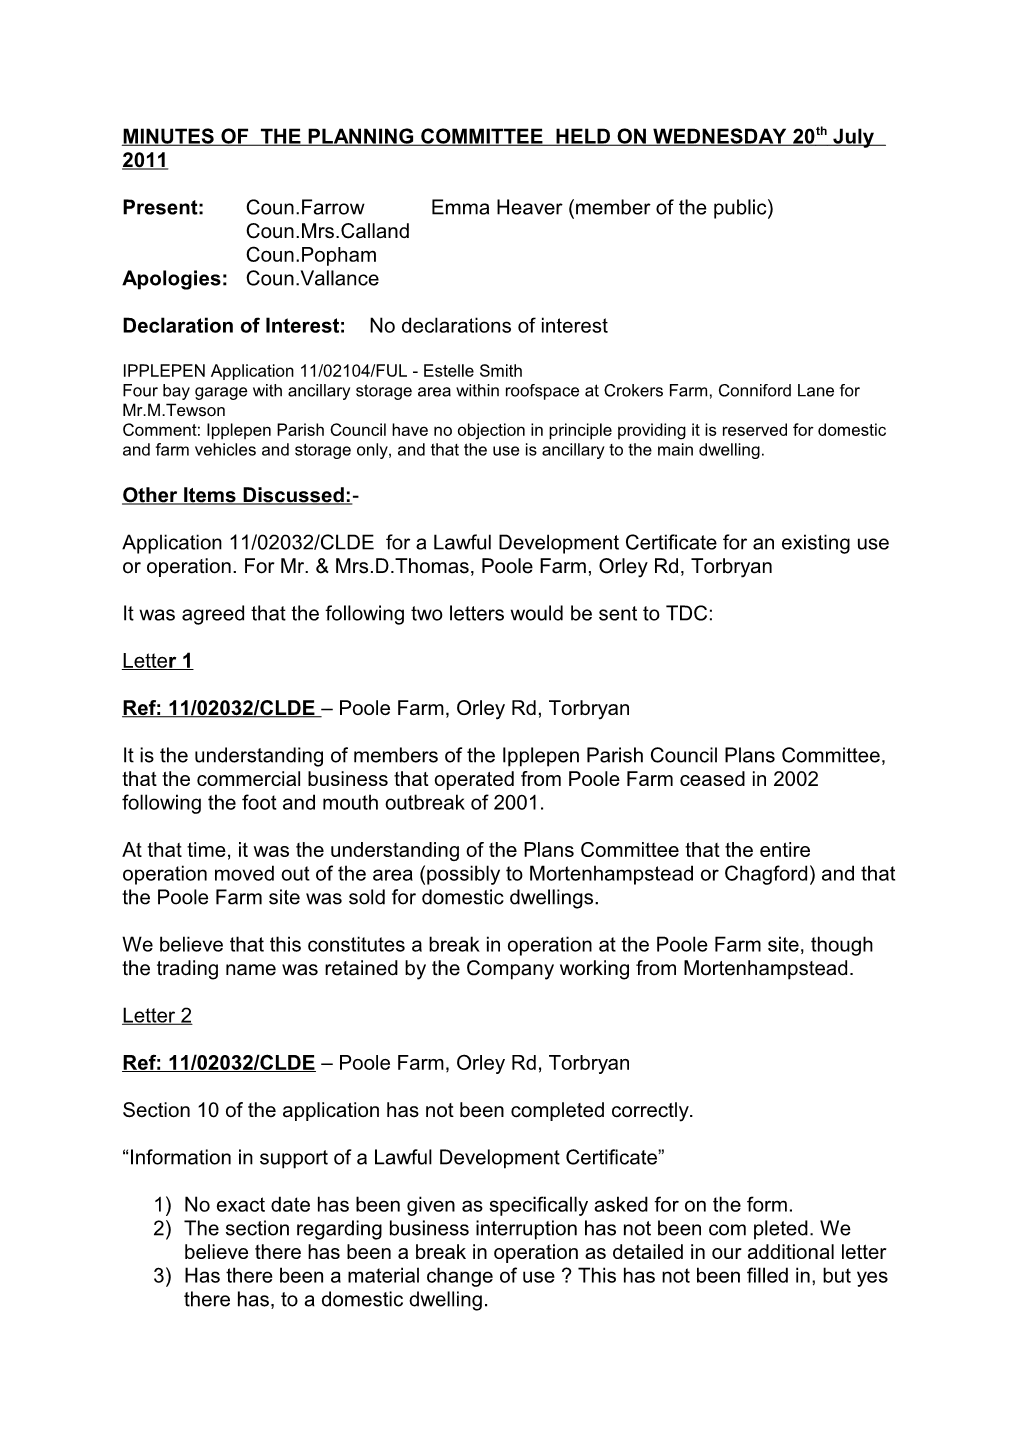 Minutes of the Regular Meeting of the Planning Committee Held on Wednesday 16 November 2005